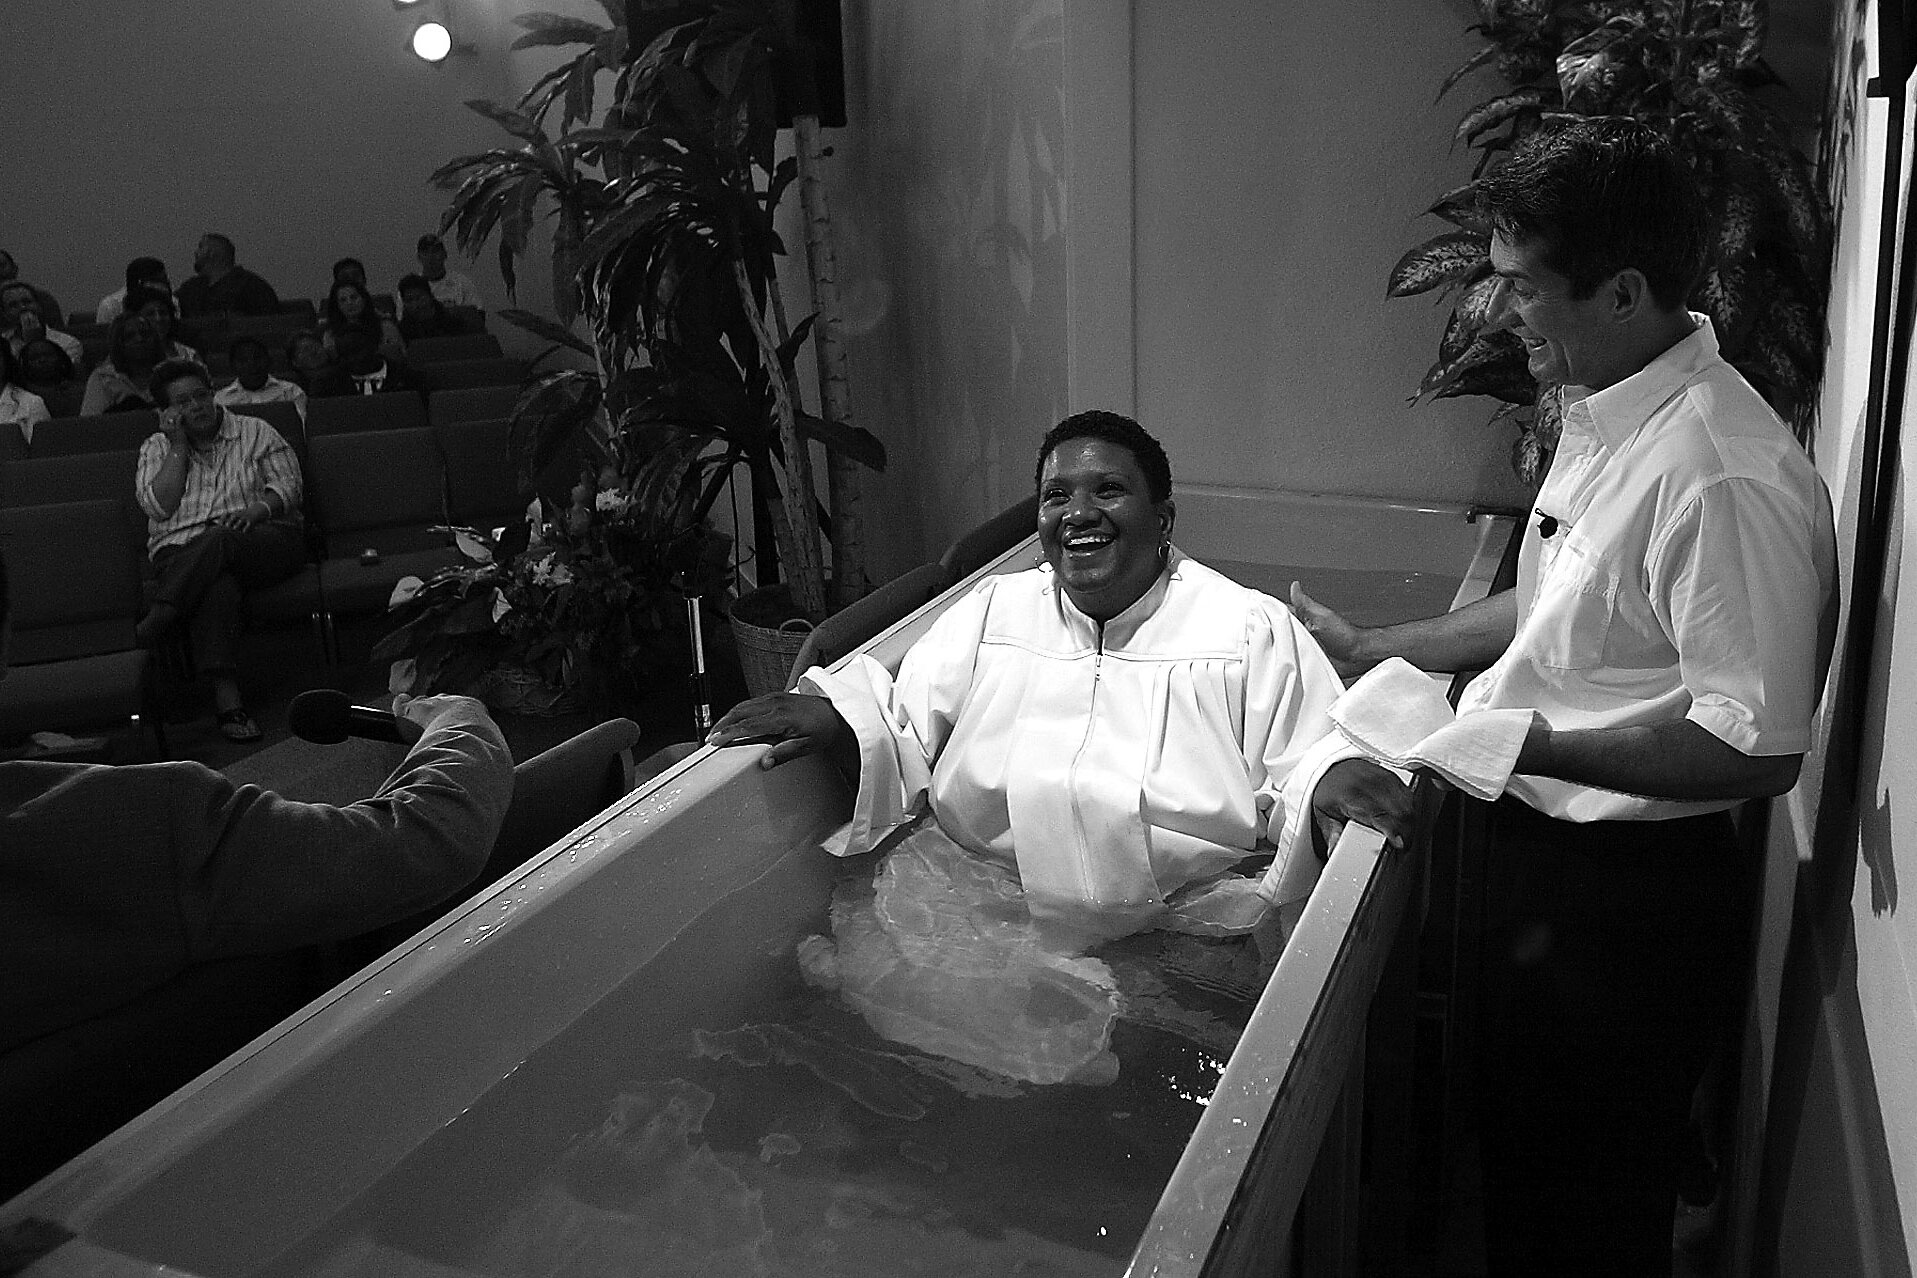   Kathy Payton smiles during her baptism at Christ Chapel, a predominantly gay Christian Church in North Hollywood, Calif.  According to the church’s pastor Jerrell Walls, at right,  “The immersion in water comes from the Greek word for baptism meani